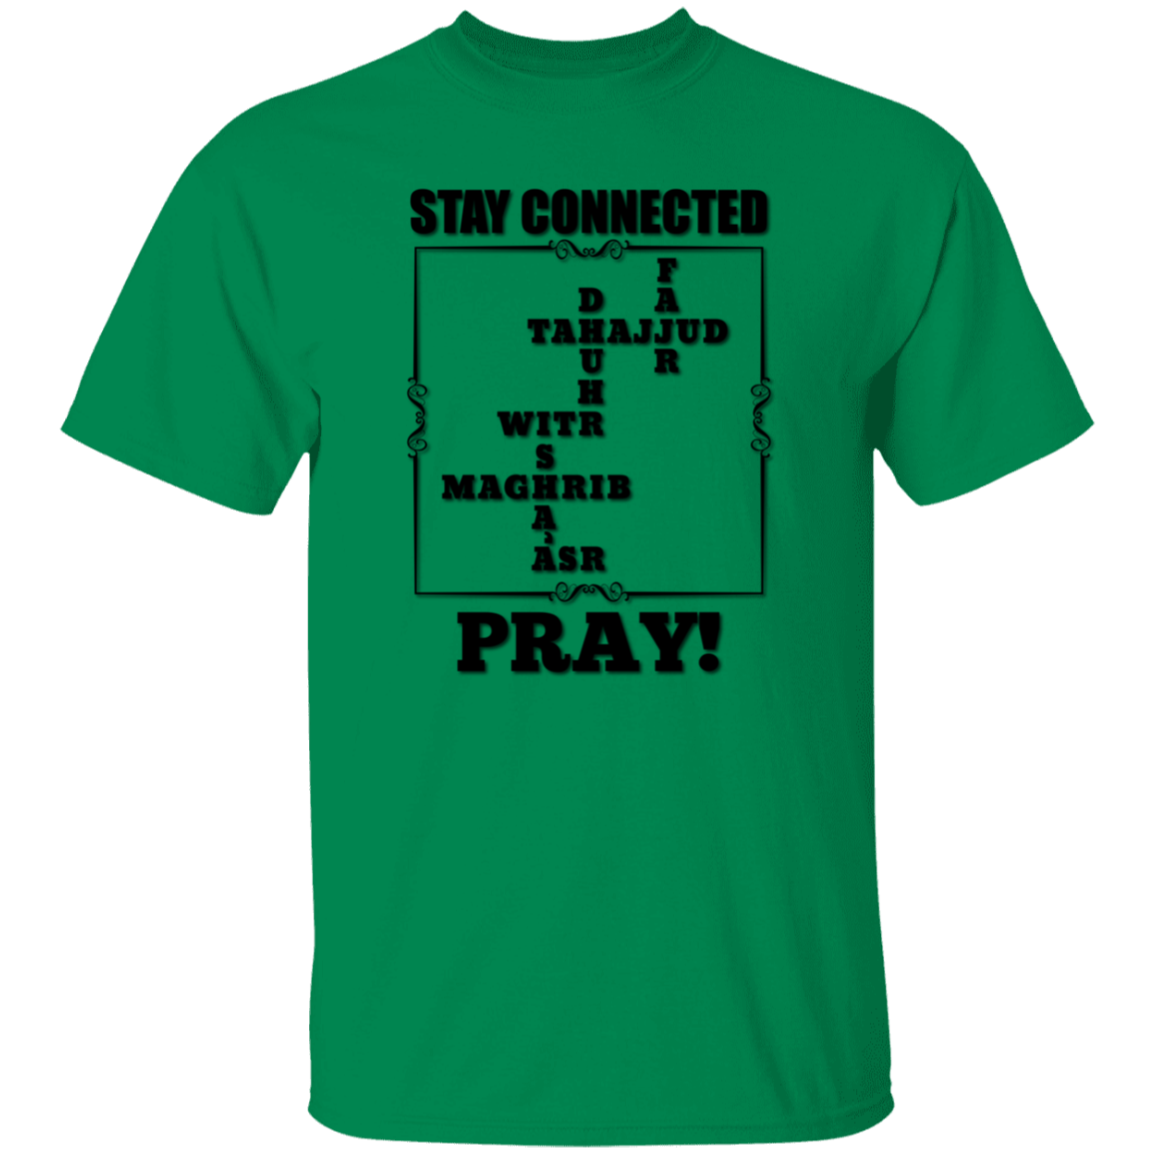 STAY CONNECTED, PRAY  T-Shirt (MORE COLOR OPTIONS)